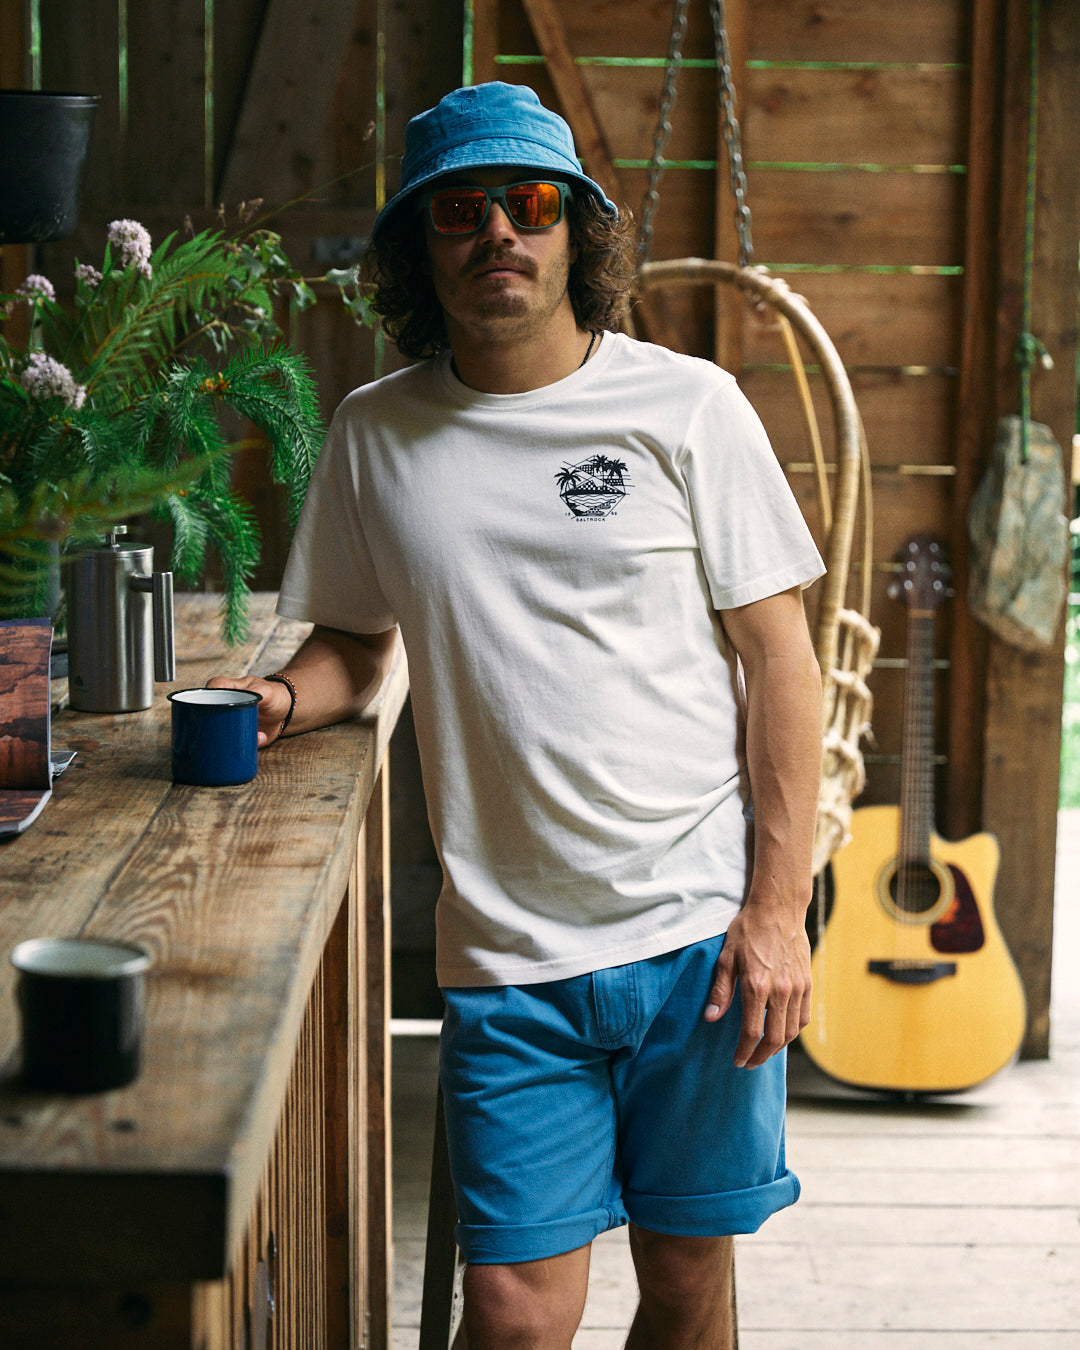 A person in a Geo Palms - Mens T-Shirt - White by Saltrock, blue shorts, and a blue hat stands indoors, leaning against a wooden counter with a blue mug in hand. A hanging chair, guitar, and plants are visible in the background.